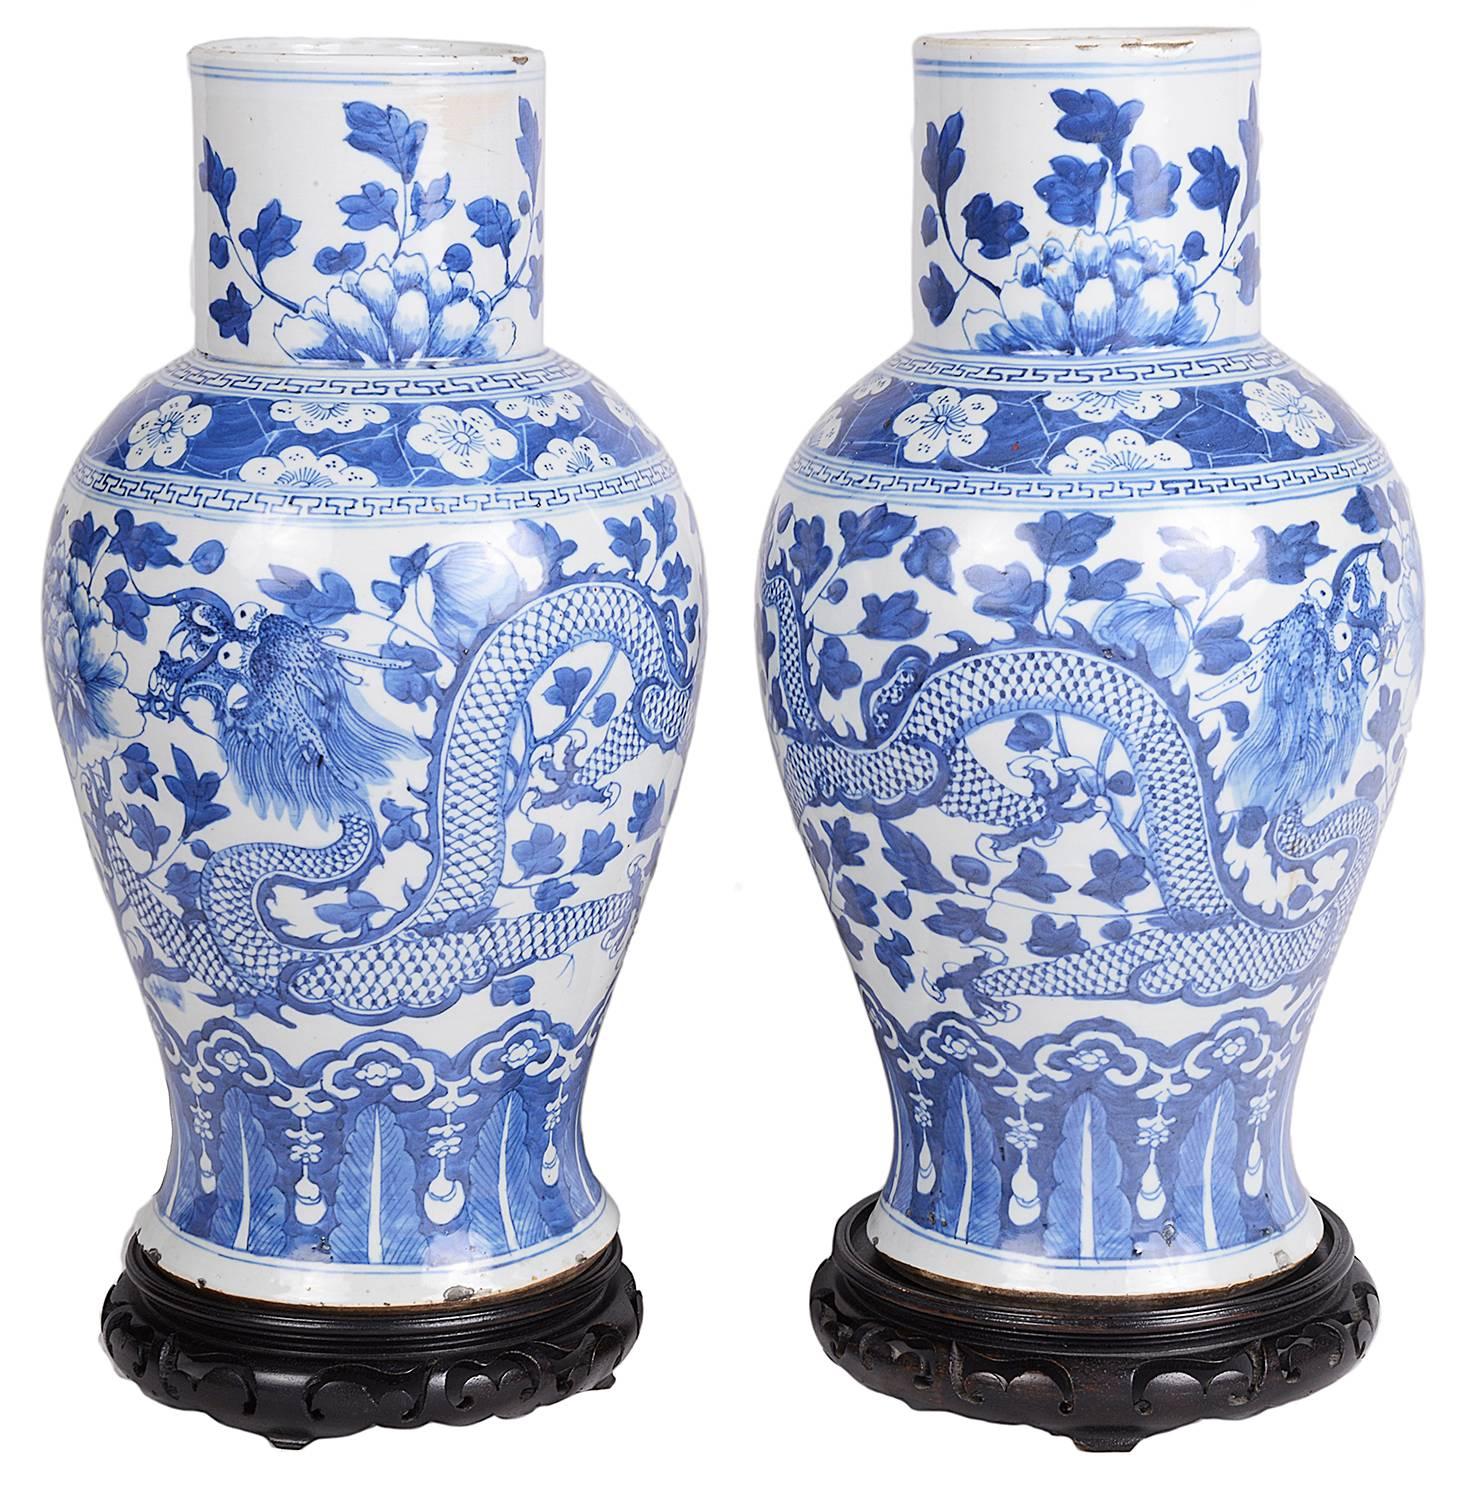 Pair Chinese 19th Century Blue and White Vase or Lamps